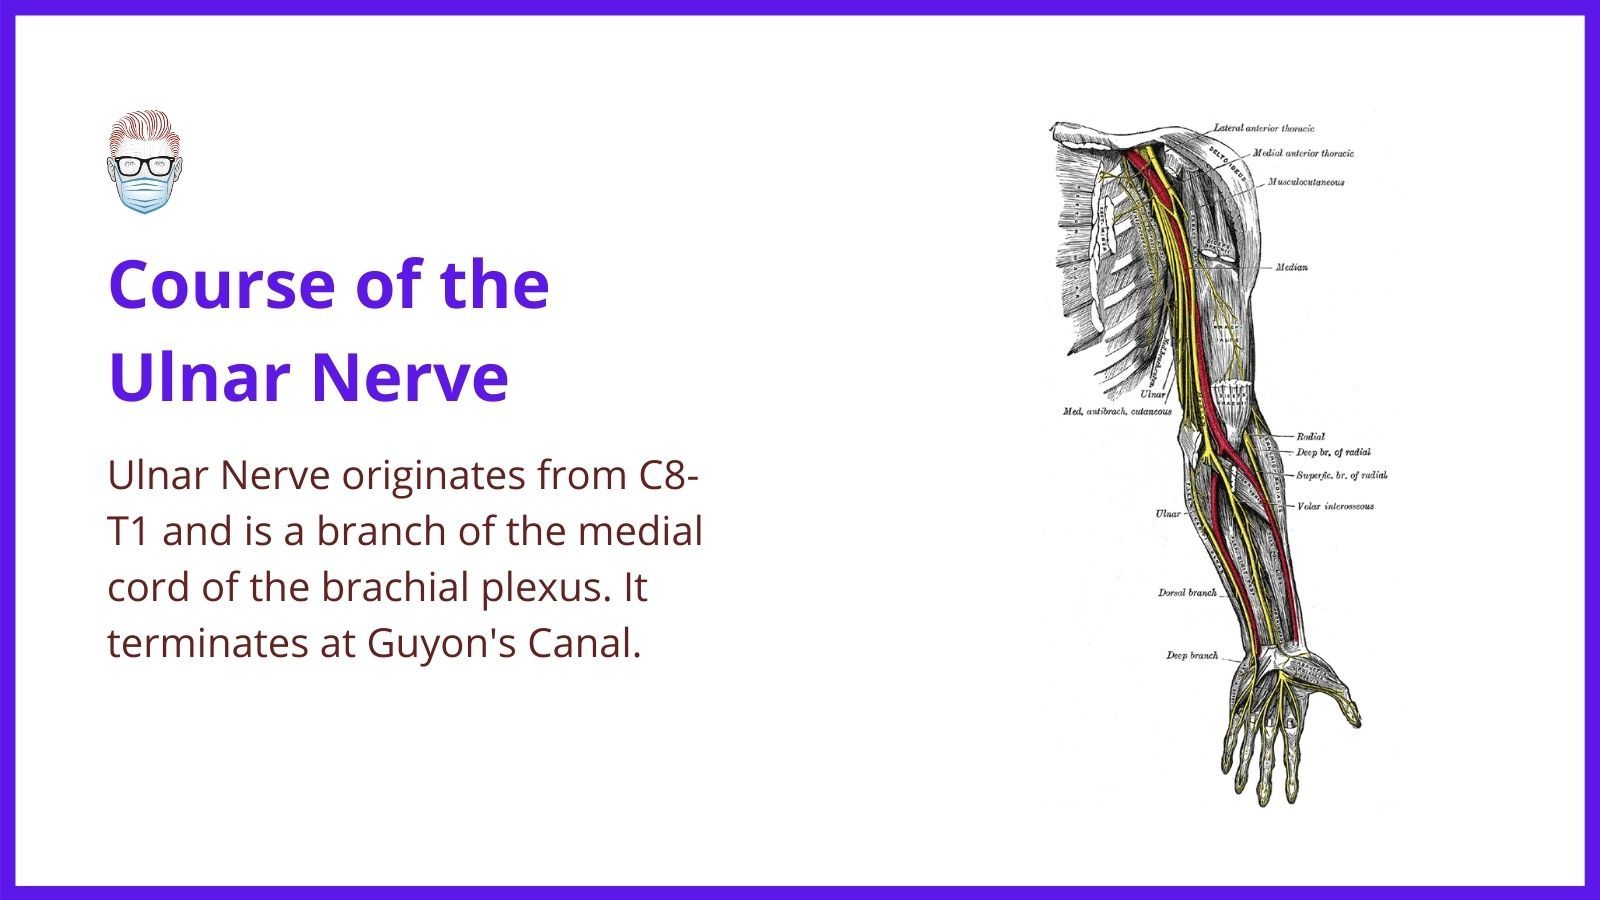 The Ulnar Nerve orientates at the C8-t1 brachial plexus and courses through the arm to terminate at Guyon's Canal